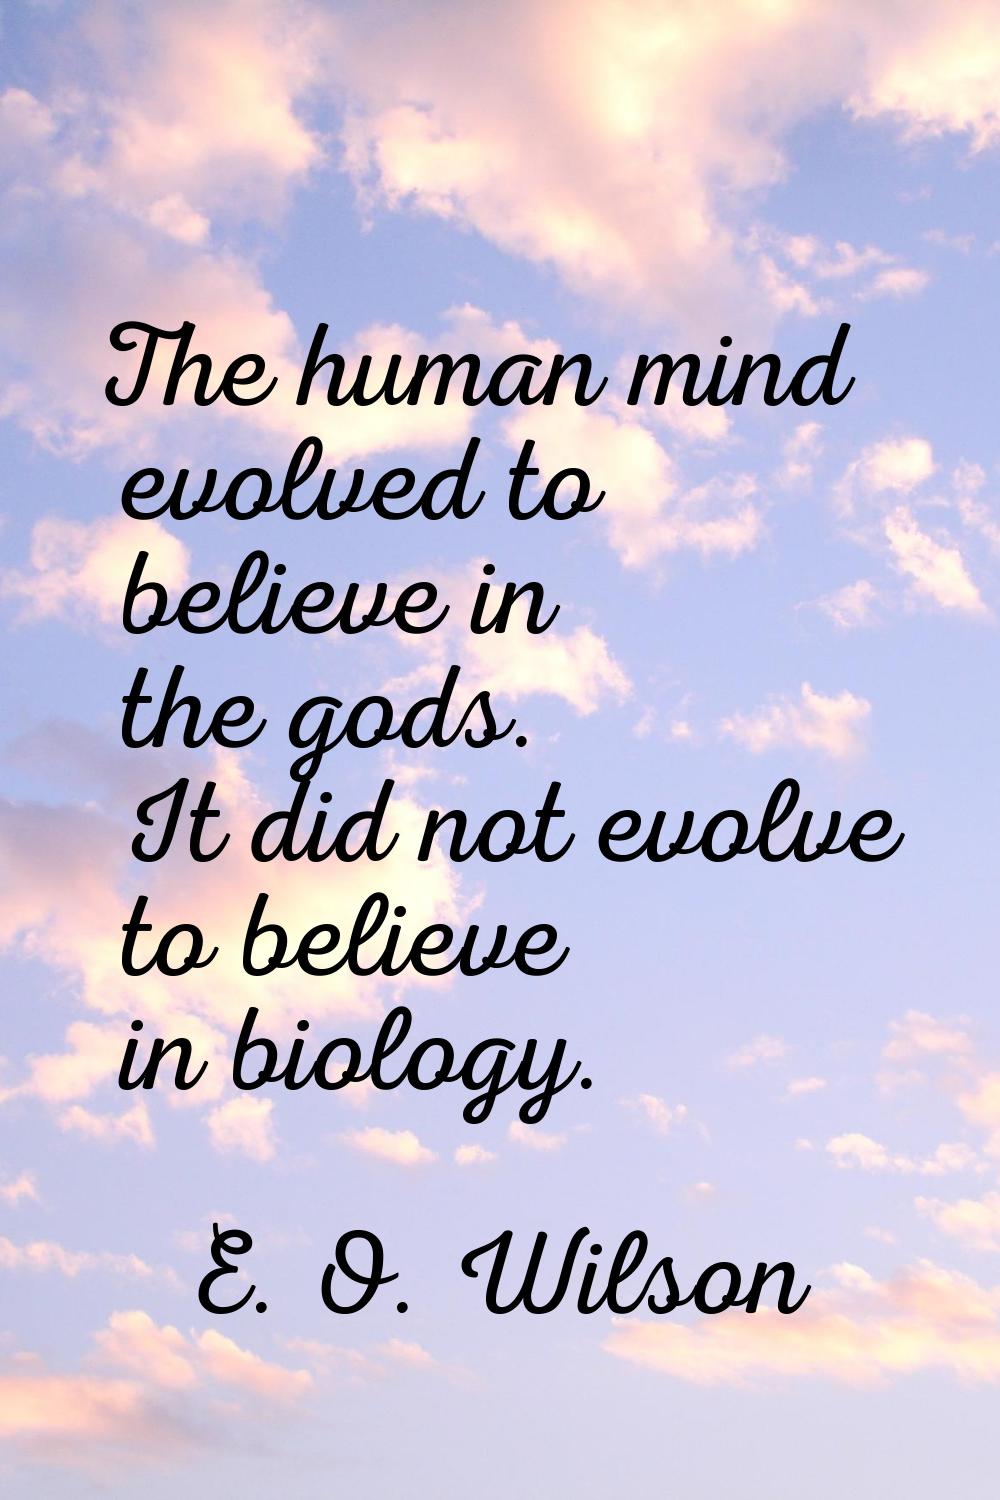 The human mind evolved to believe in the gods. It did not evolve to believe in biology.